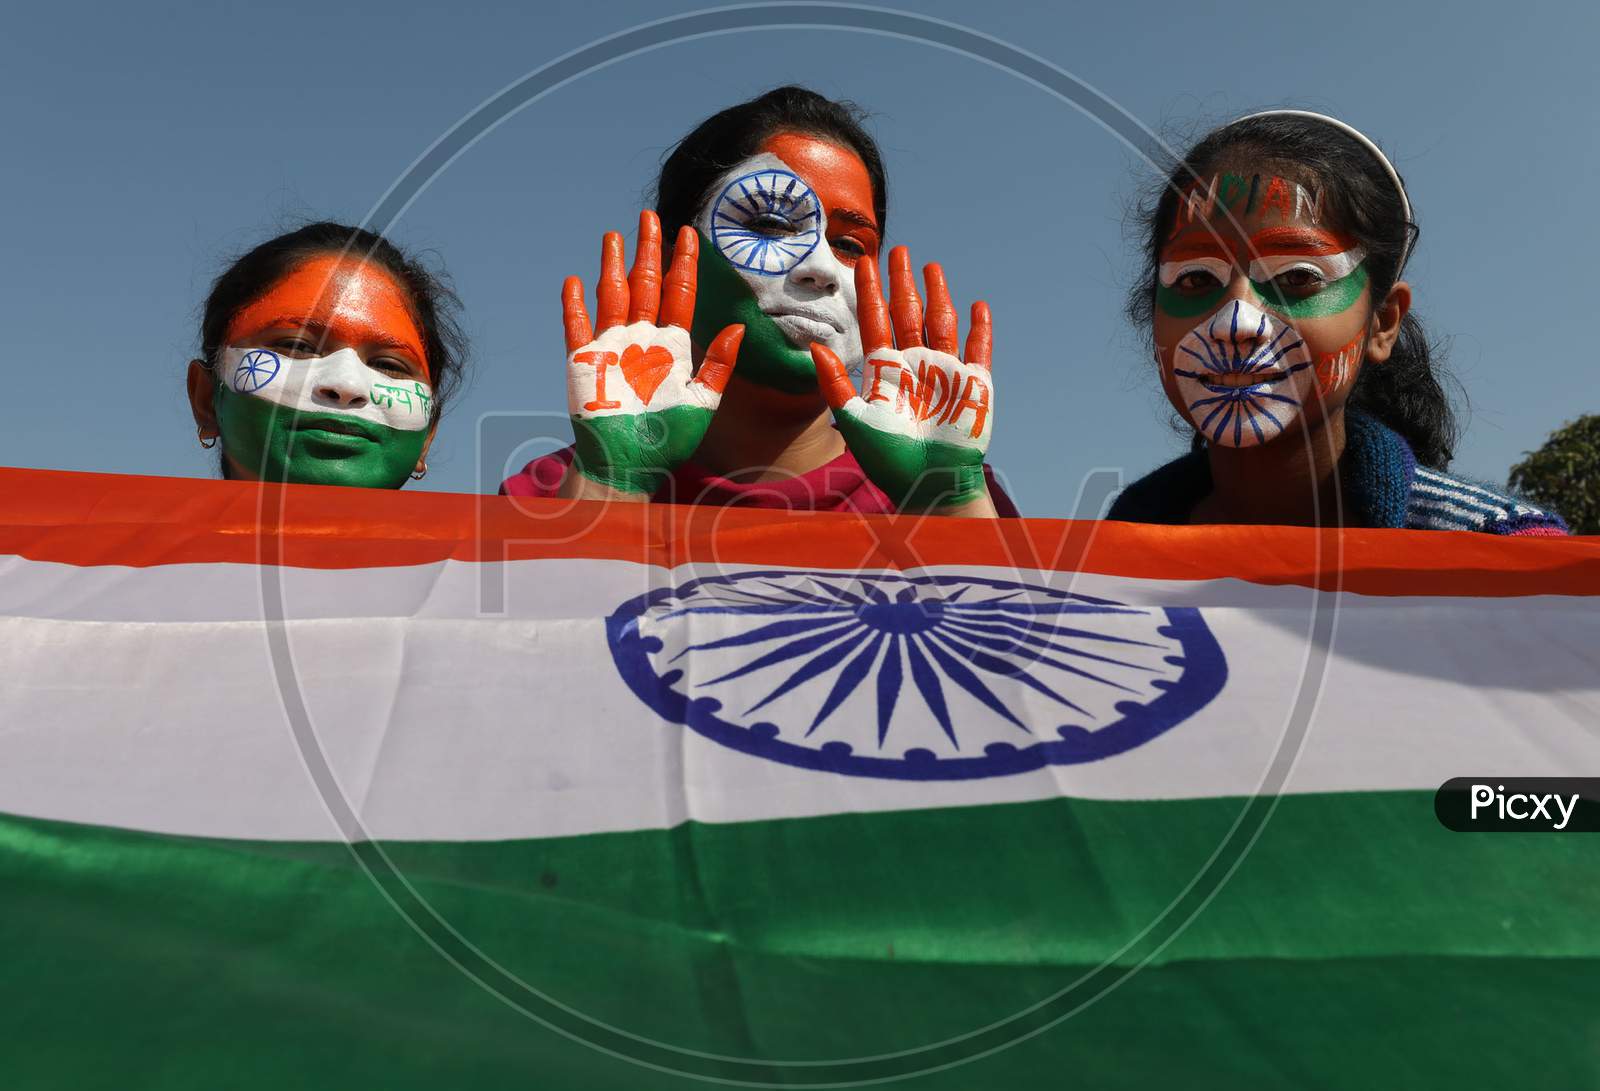 Girls with her face and hand painted in Tricolor poses for photographs on the eve of 72nd Republic Day, in Jammu, Monday, Jan. 25, 2021.